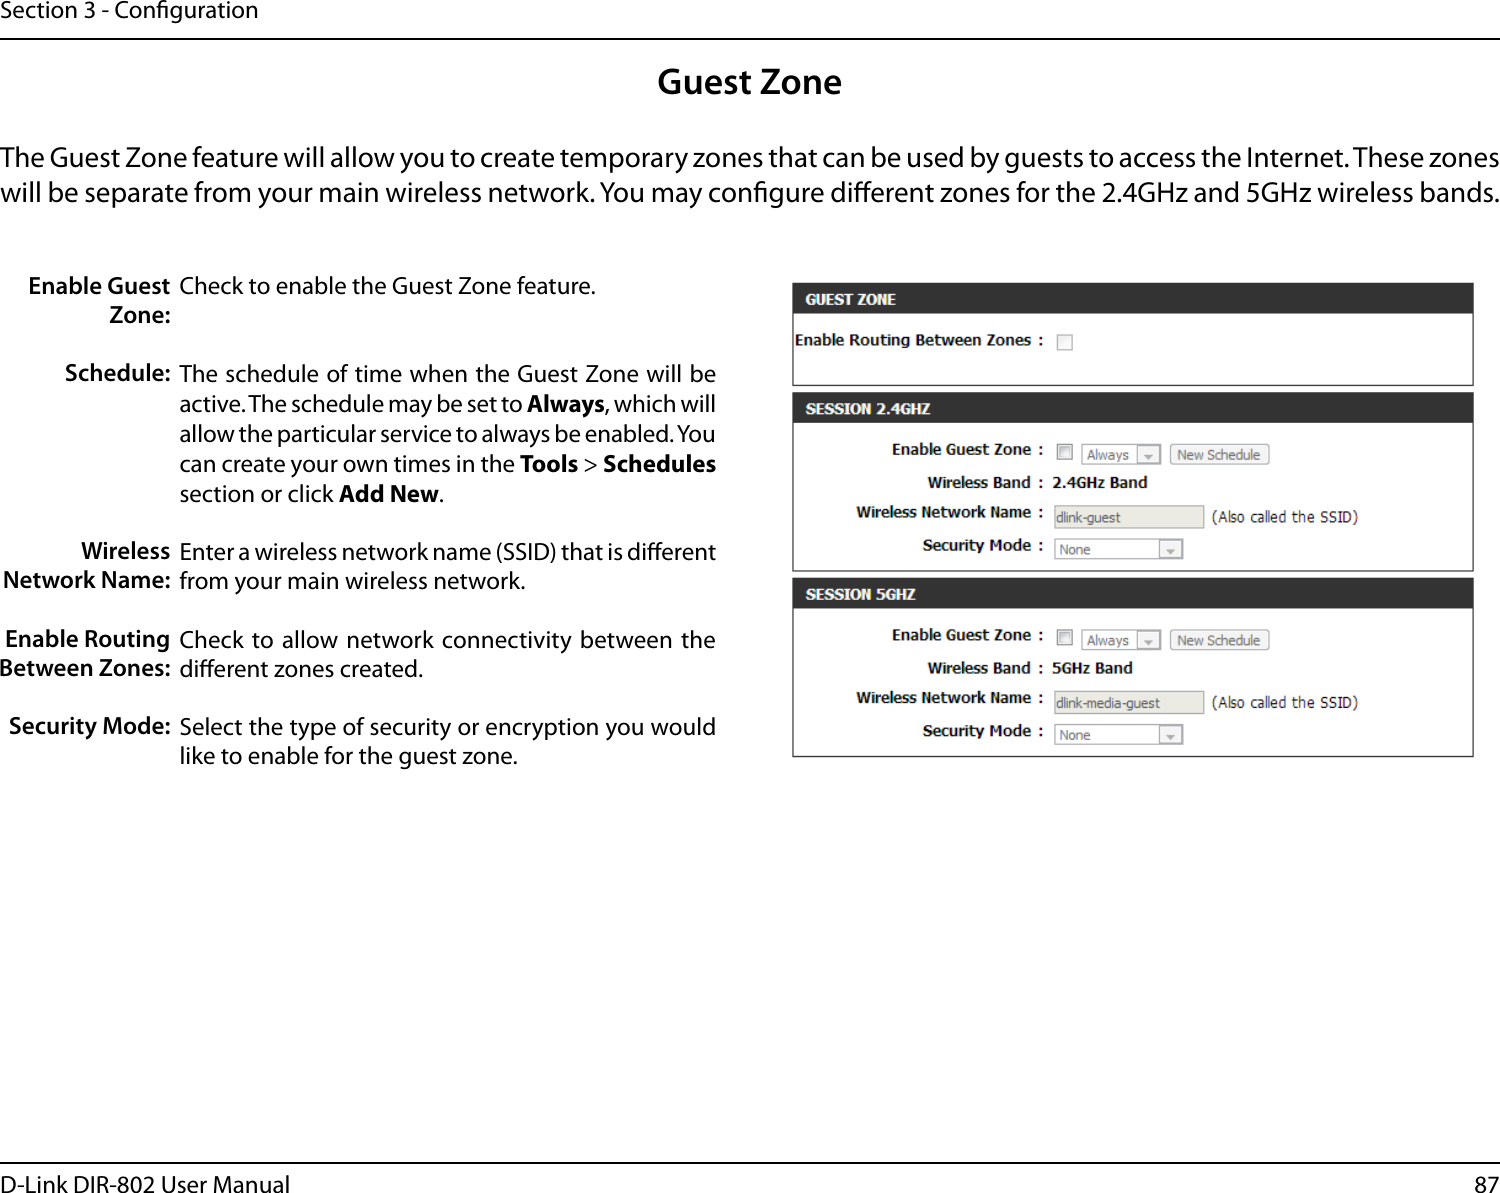 87D-Link DIR-802 User ManualSection 3 - CongurationGuest ZoneCheck to enable the Guest Zone feature. The schedule of time when the Guest Zone will be active. The schedule may be set to Always, which will allow the particular service to always be enabled. You can create your own times in the Tools &gt; Schedules section or click Add New.Enter a wireless network name (SSID) that is dierent from your main wireless network.Check to allow network connectivity  between the dierent zones created. Select the type of security or encryption you would like to enable for the guest zone.  Enable Guest Zone:Schedule:Wireless Network Name:Enable Routing Between Zones:Security Mode:The Guest Zone feature will allow you to create temporary zones that can be used by guests to access the Internet. These zones will be separate from your main wireless network. You may congure dierent zones for the 2.4GHz and 5GHz wireless bands.